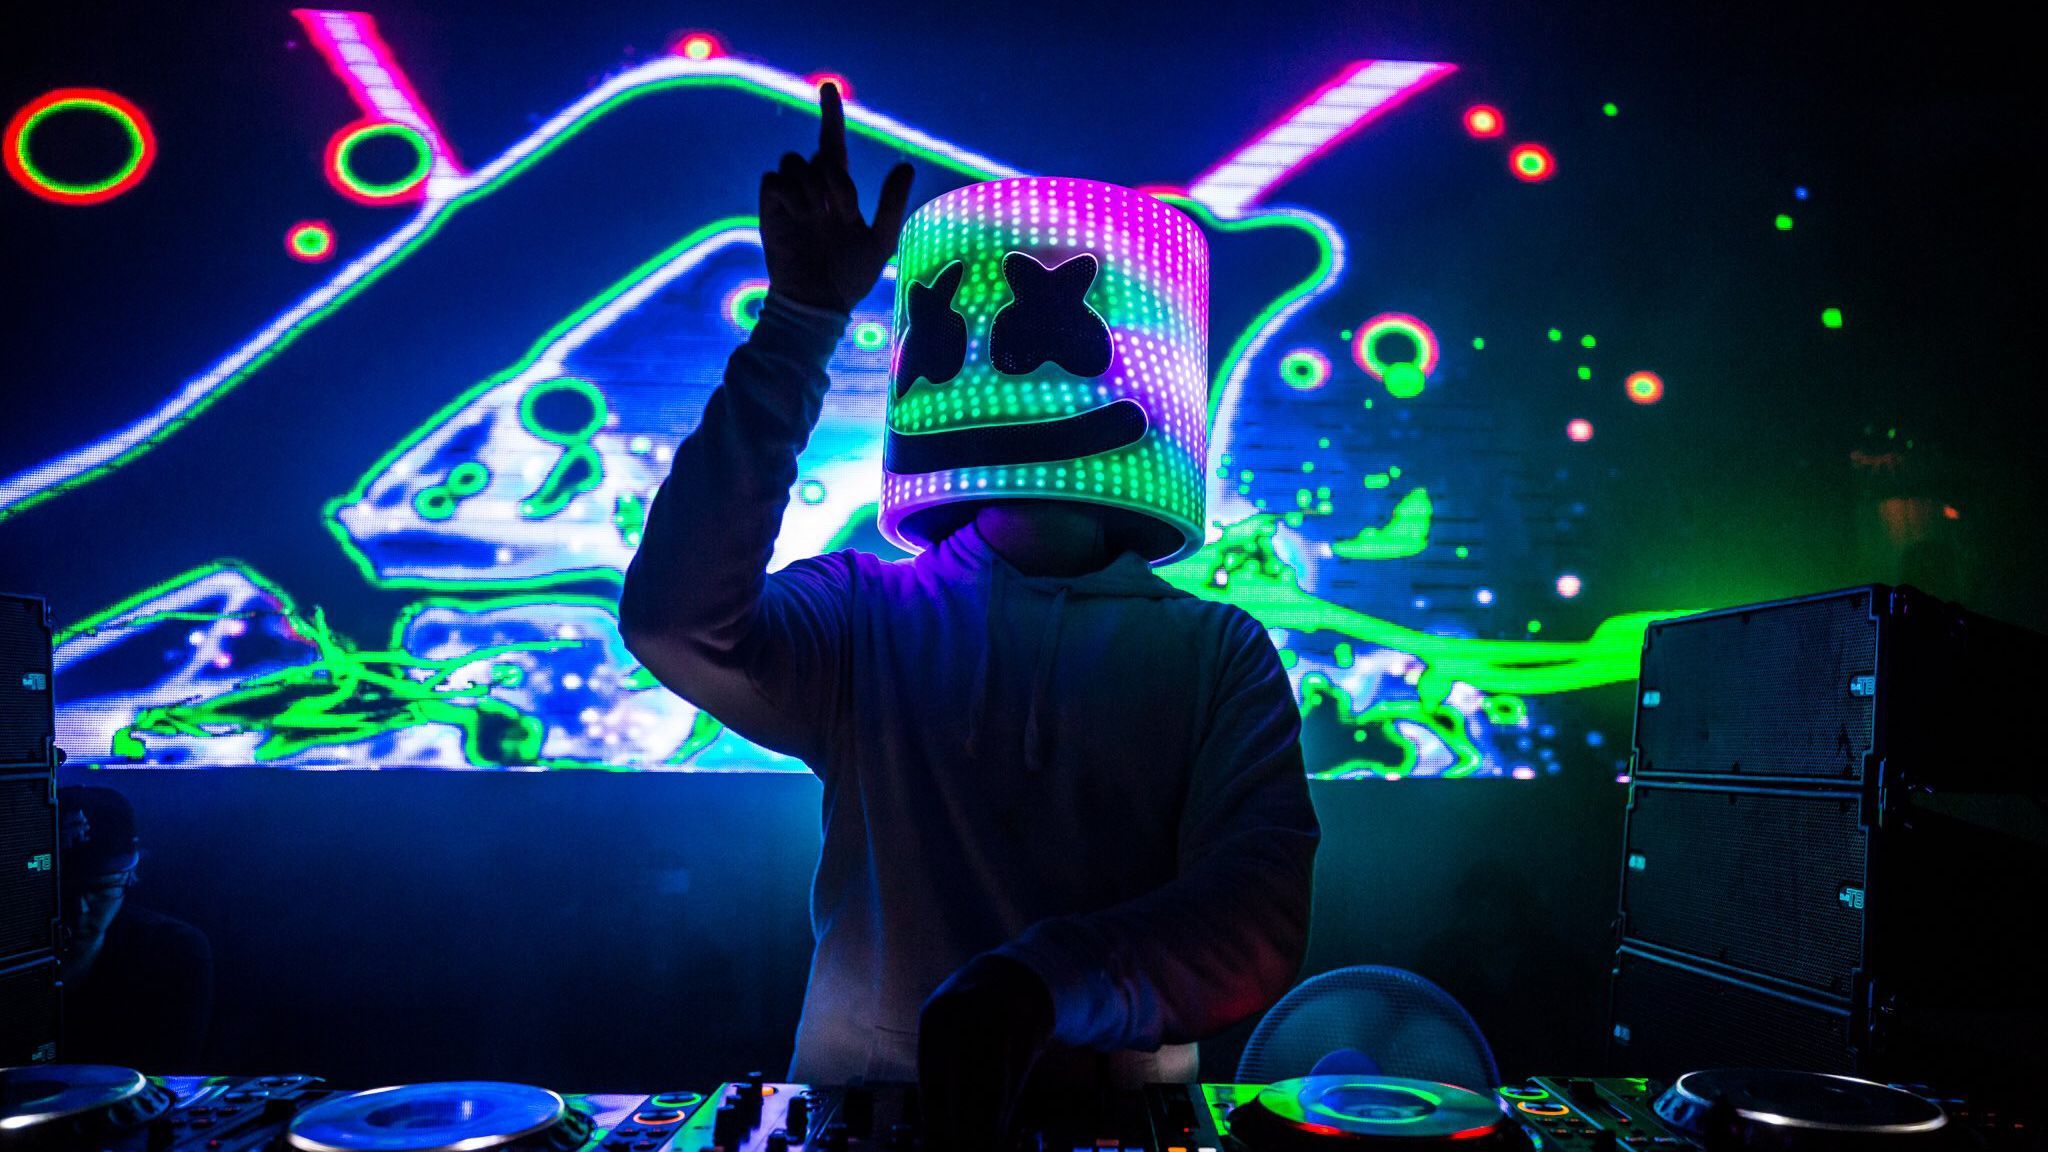 Marshmello is a popular DJ and producer who has worked with a number of high-profile artists. - Marshmello